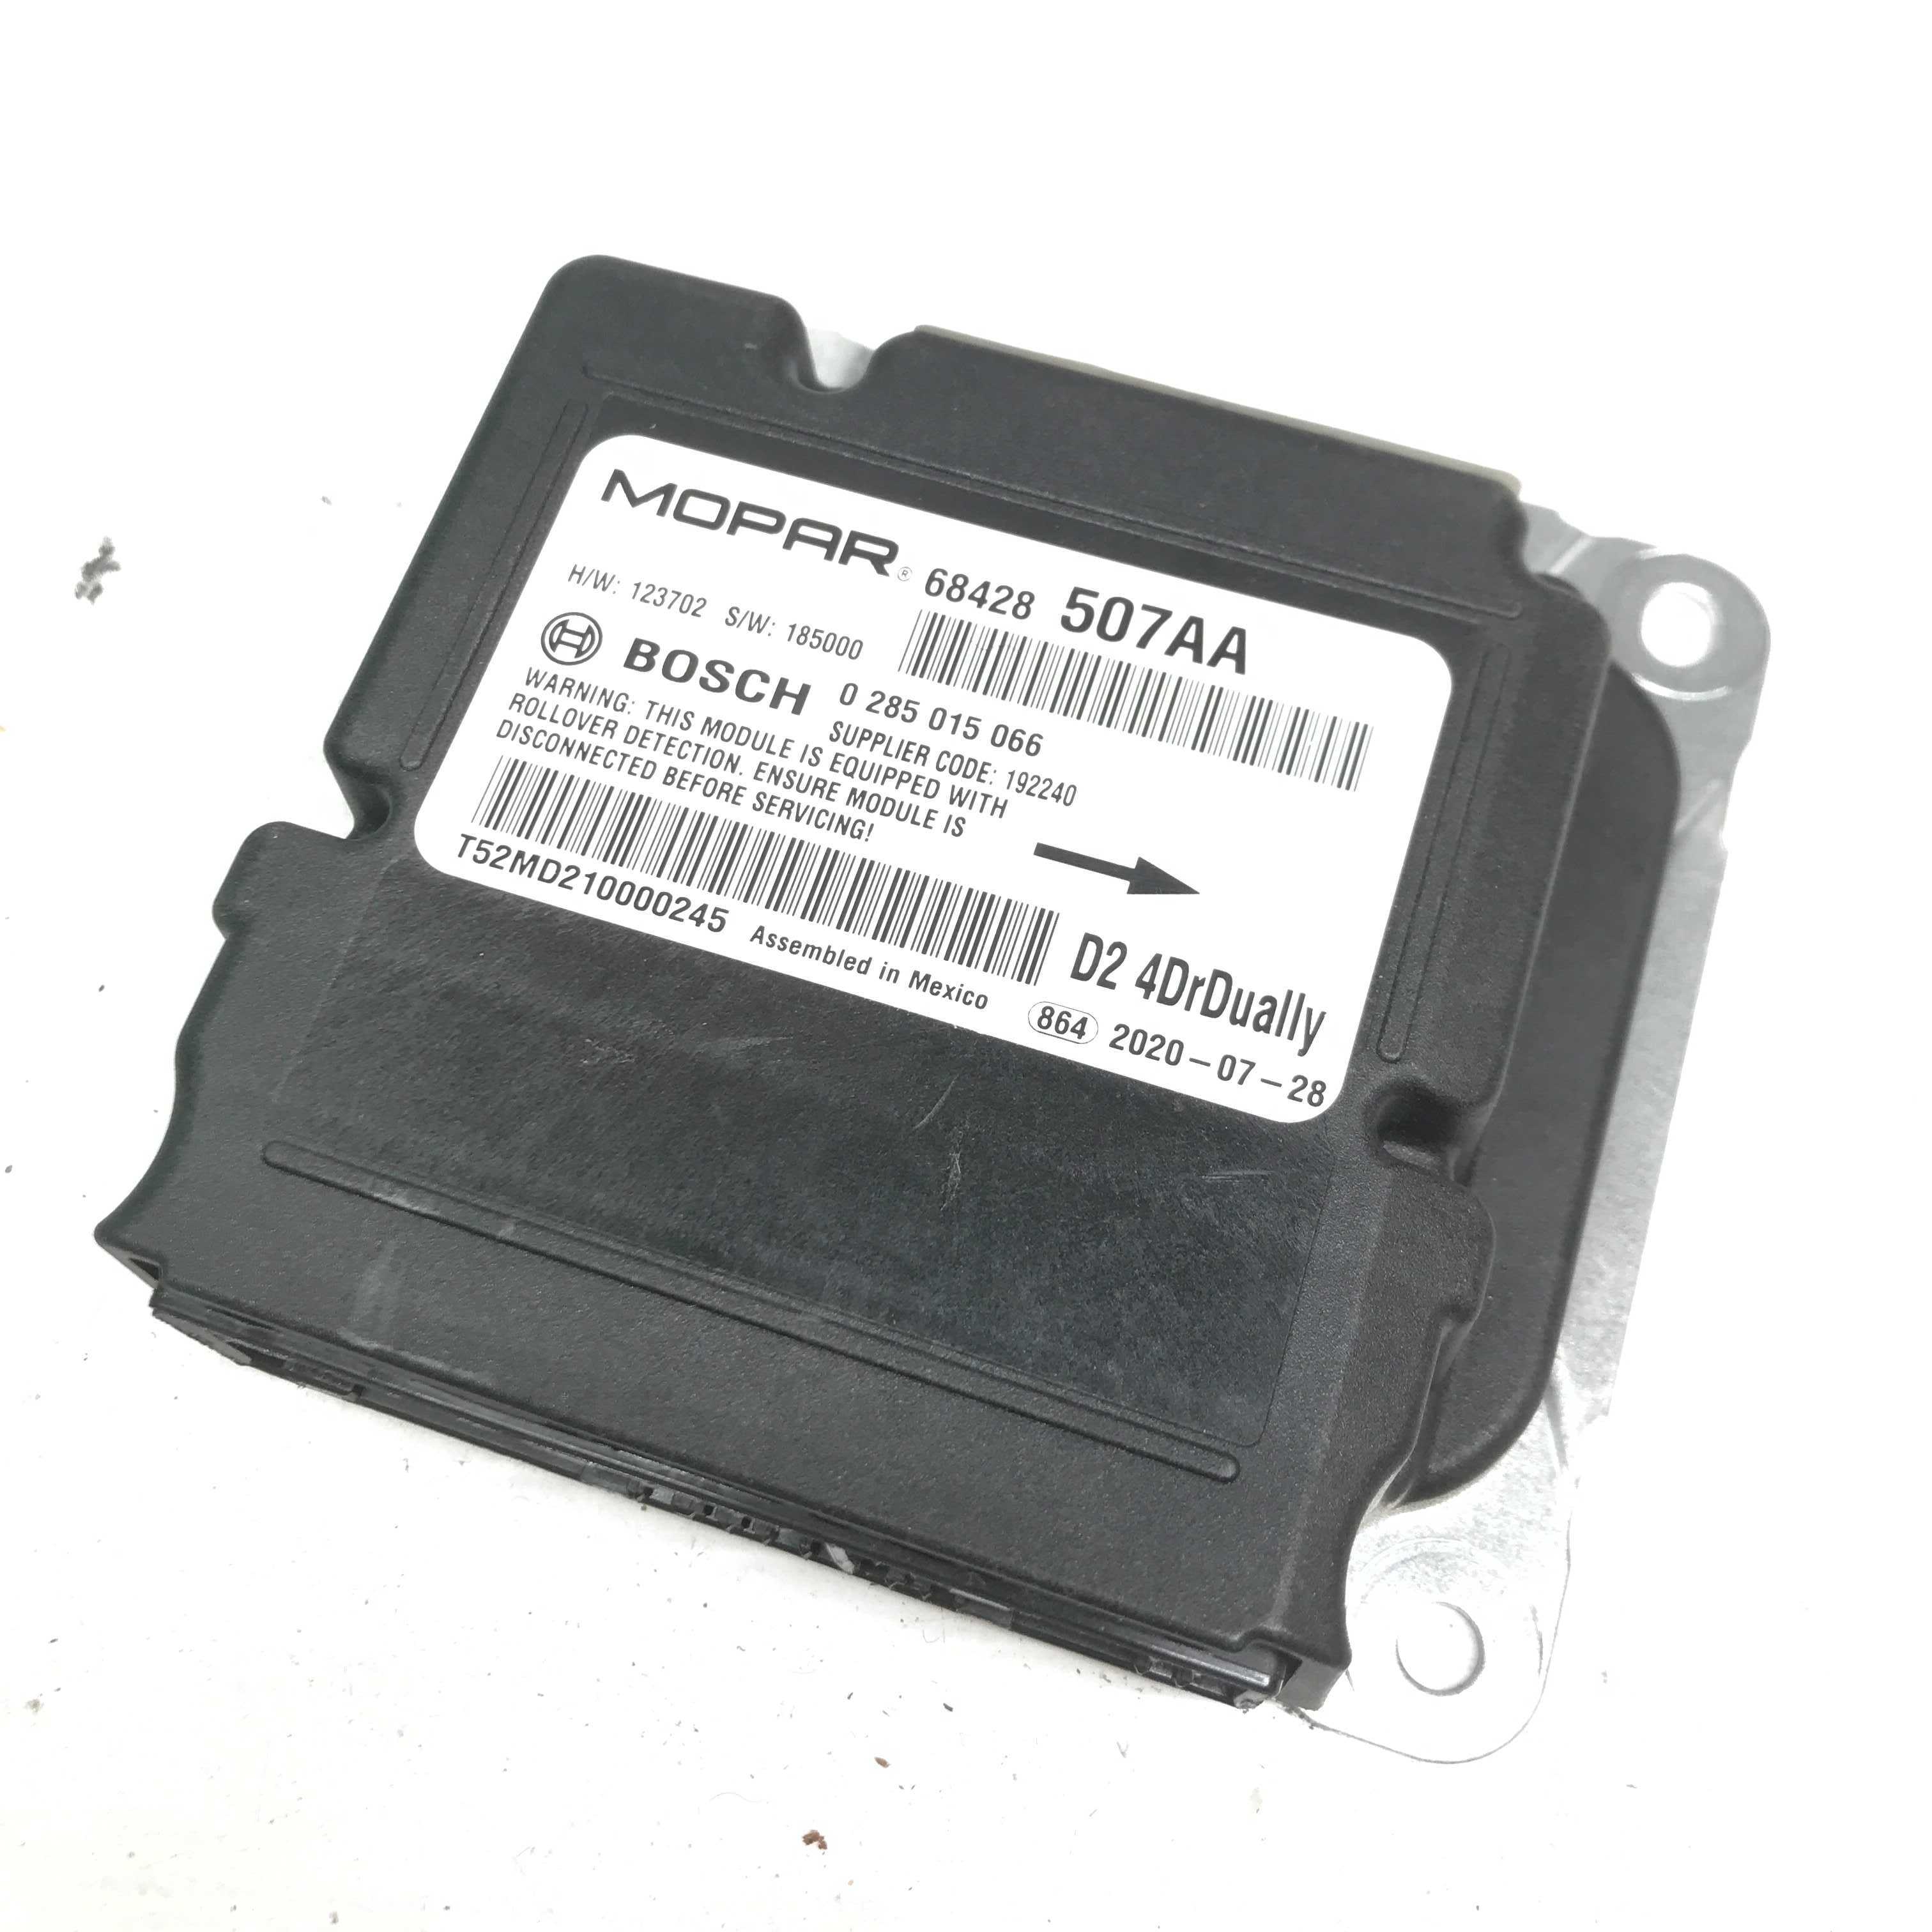 RAM 3500 SRS ORC ORM Occupant Control Module - Airbag Computer Control Module PART #68428507AA